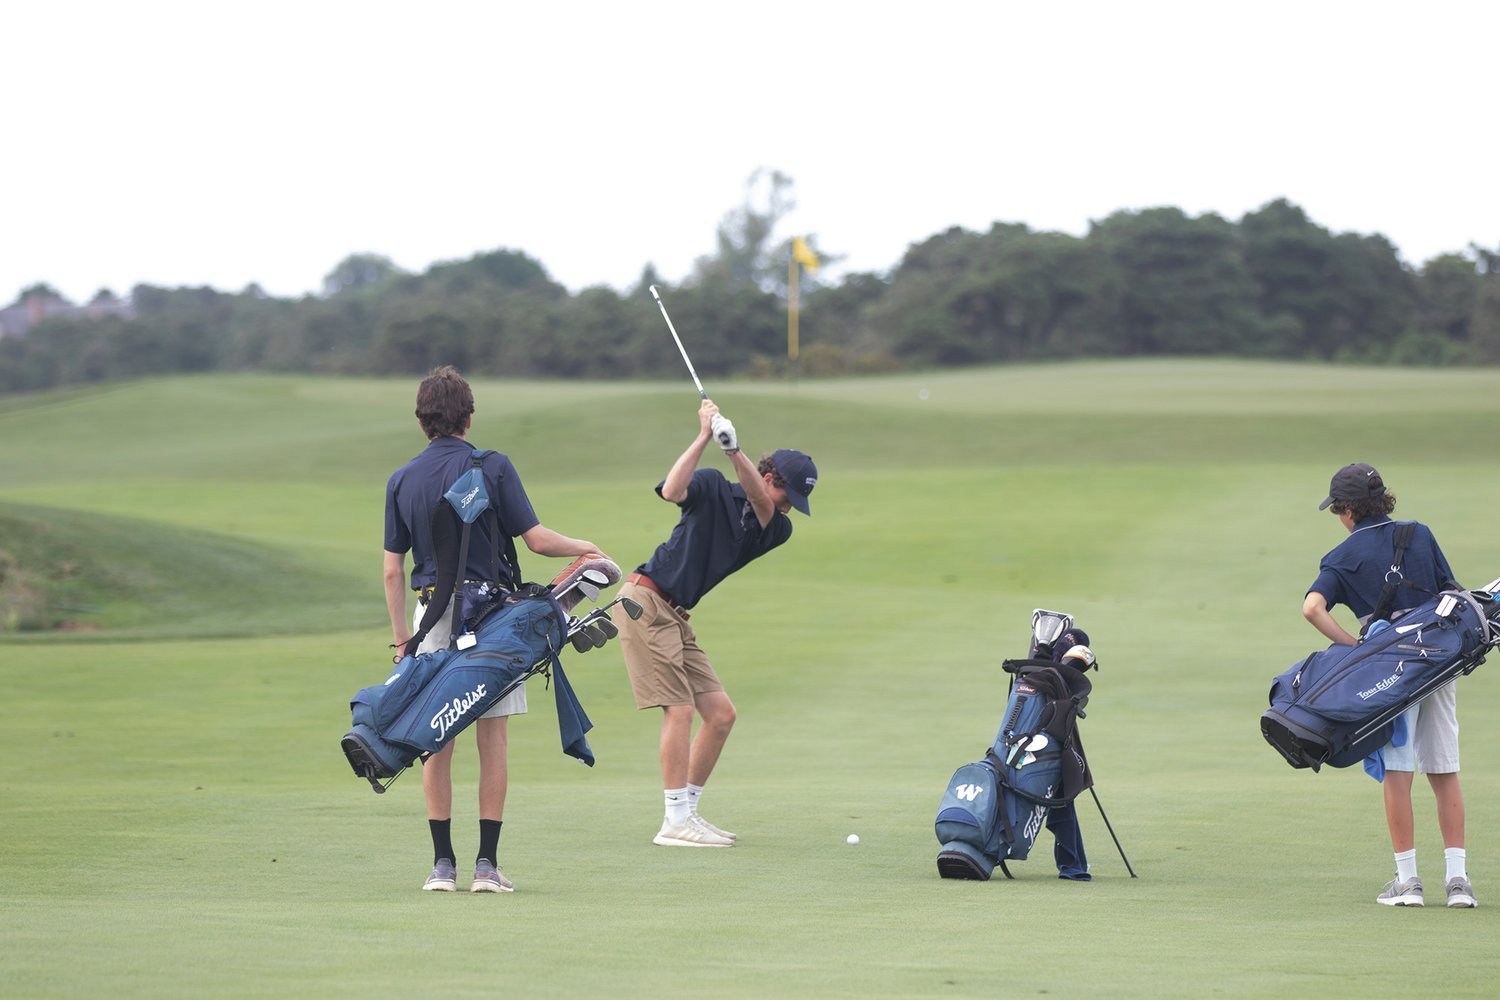 Griffin Starr prepares to hit a shot from the fairway on the back nine at Miacomet in Nantucket’s season-opening 4-3 win over Cape Cod Academy Tuesday.